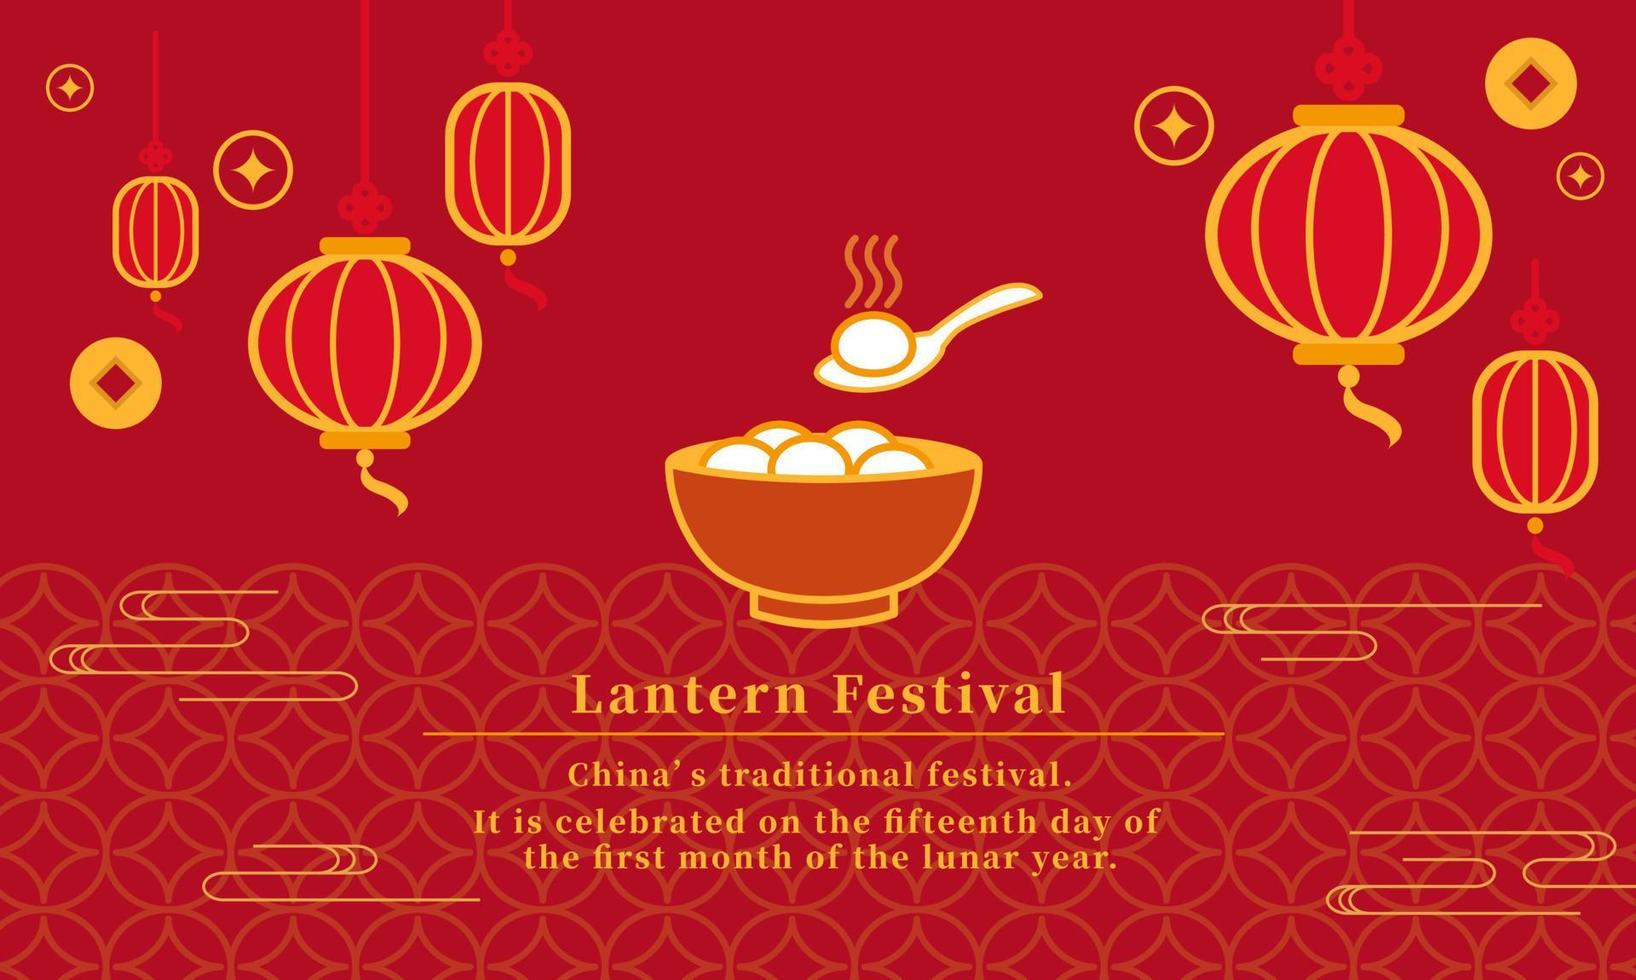 Minimalist card template with sweet dumplings and lantern decoration for lantern festival vector